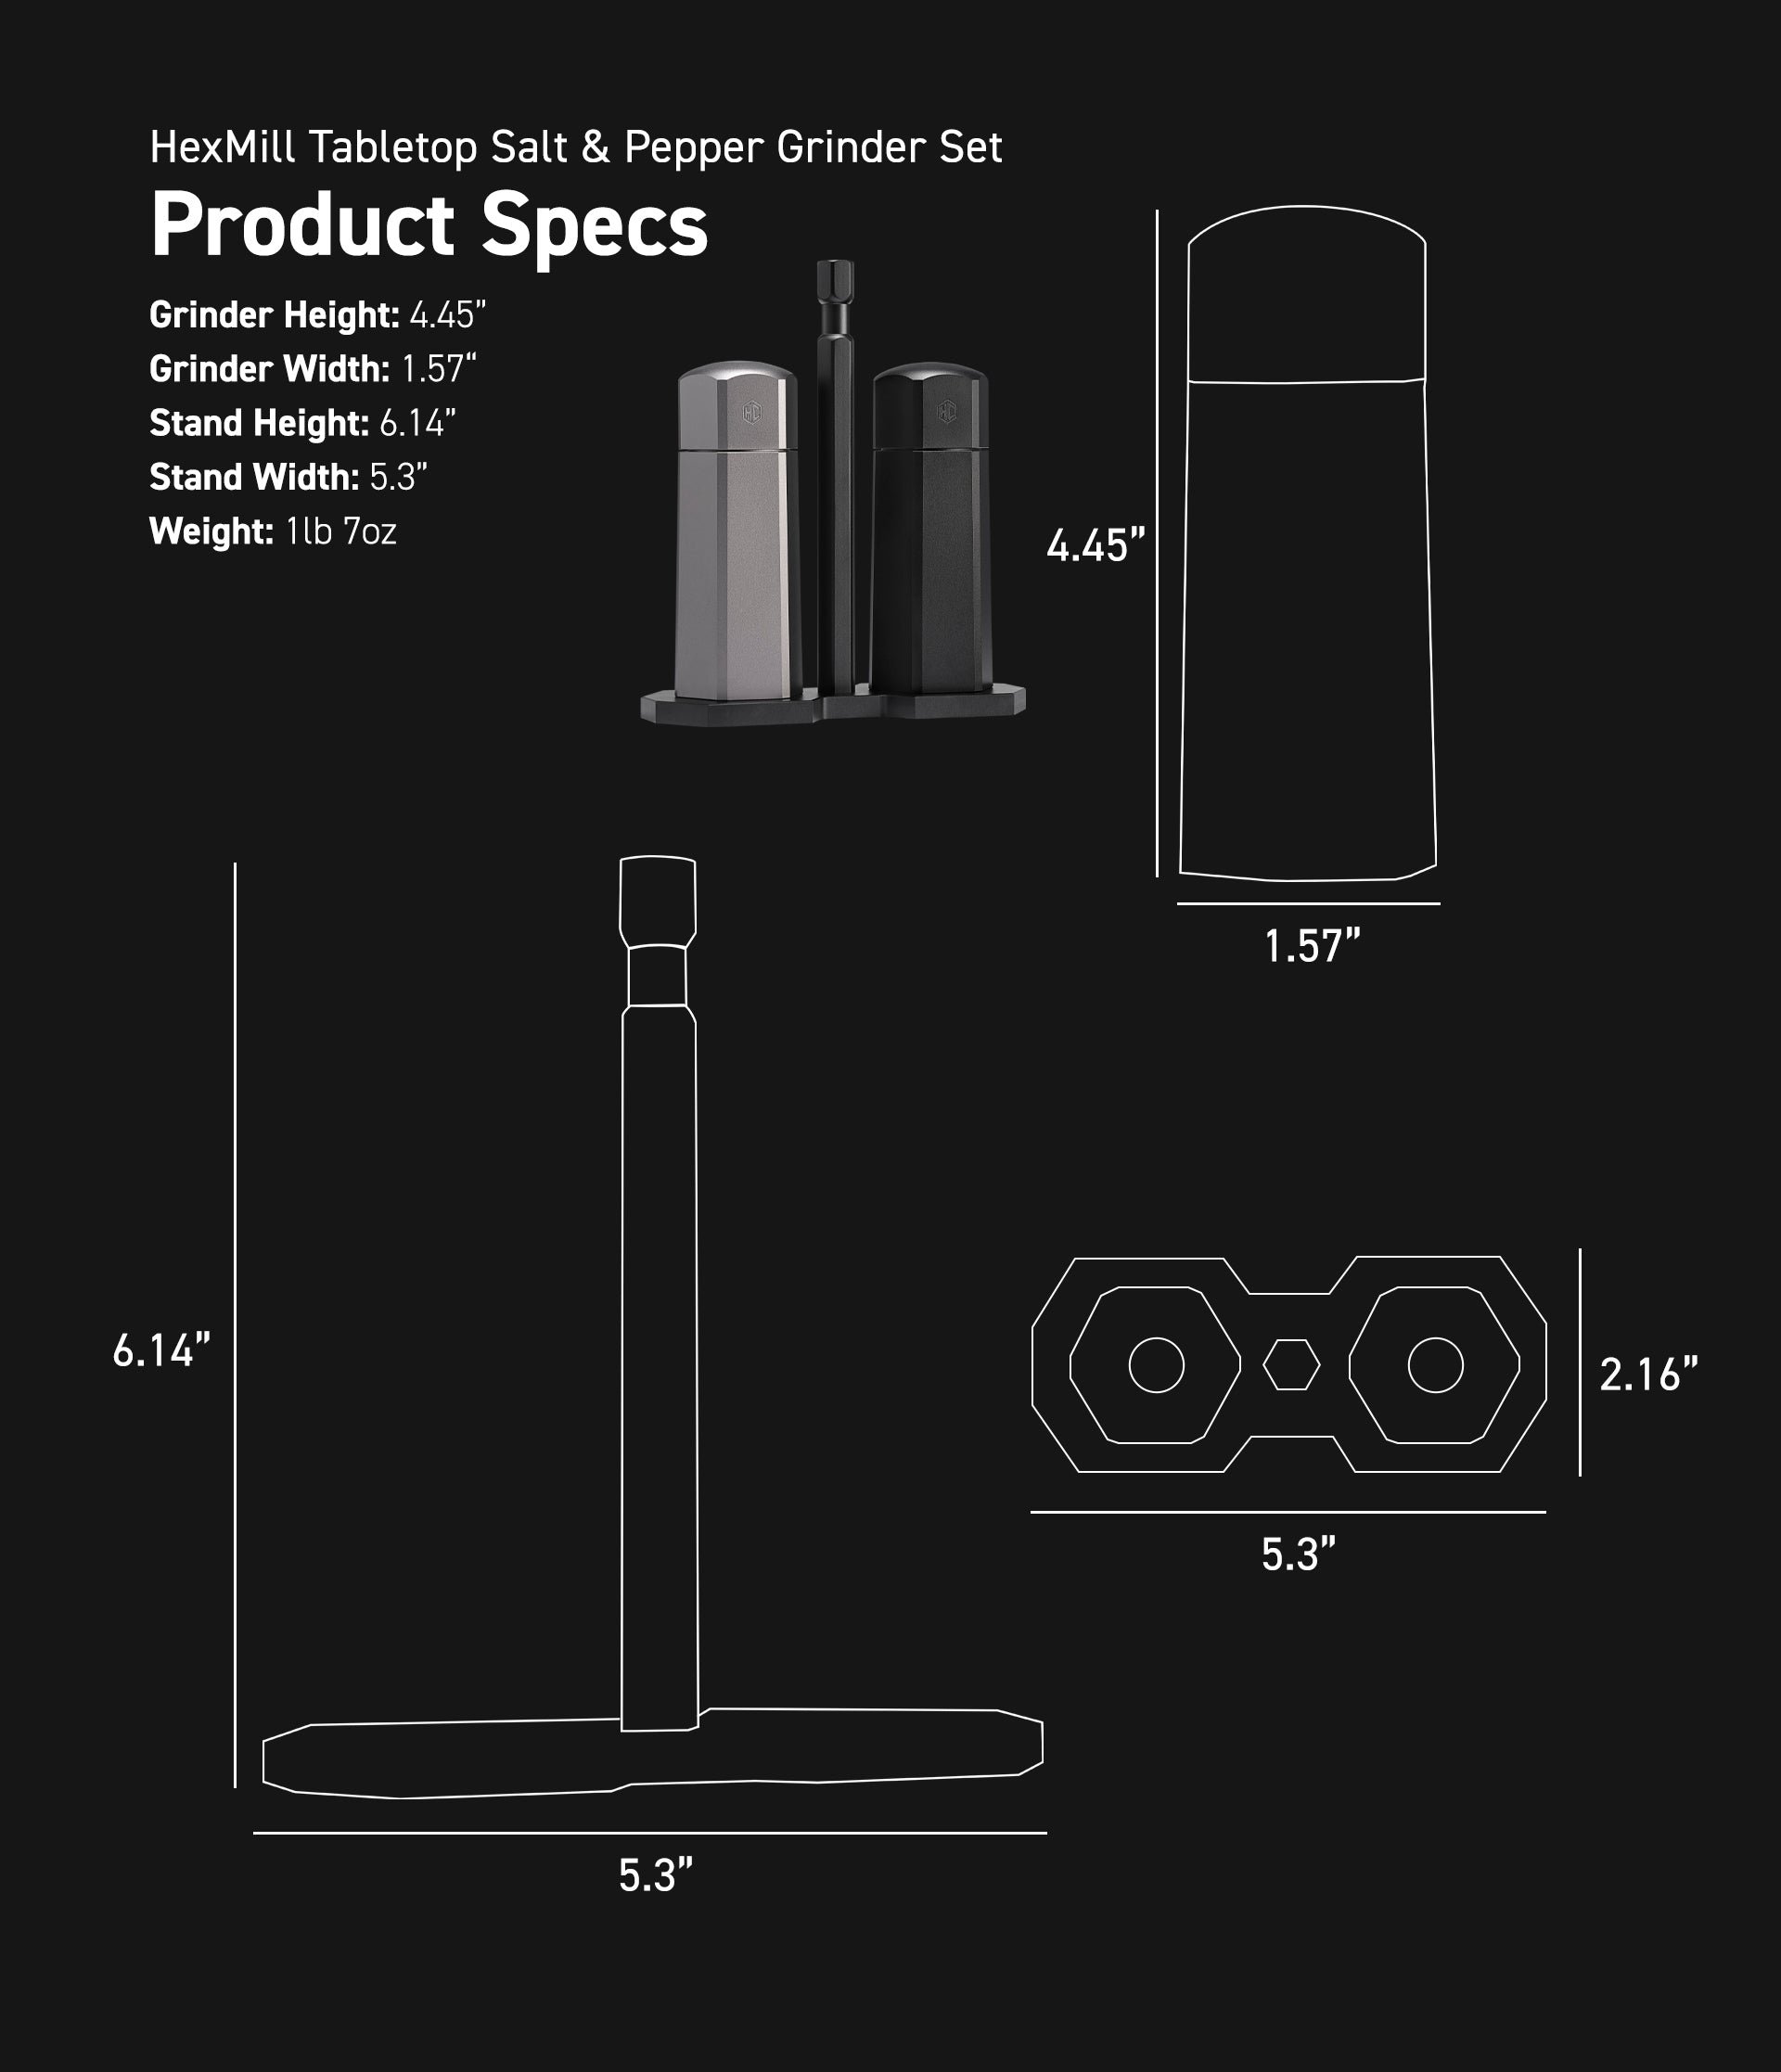 Informative graphic showcasing the HexMill Tabletop Salt & Pepper Grinder Set with product specifications. The set includes two grinders, each 4.45 inches in height and 1.57 inches in width, accompanied by a stand that measures 6.14 inches in height and 5.3 inches in width. The entire set weighs 1 pound 7 ounces, and the detailed outline drawing provides a visual representation of the dimensions.